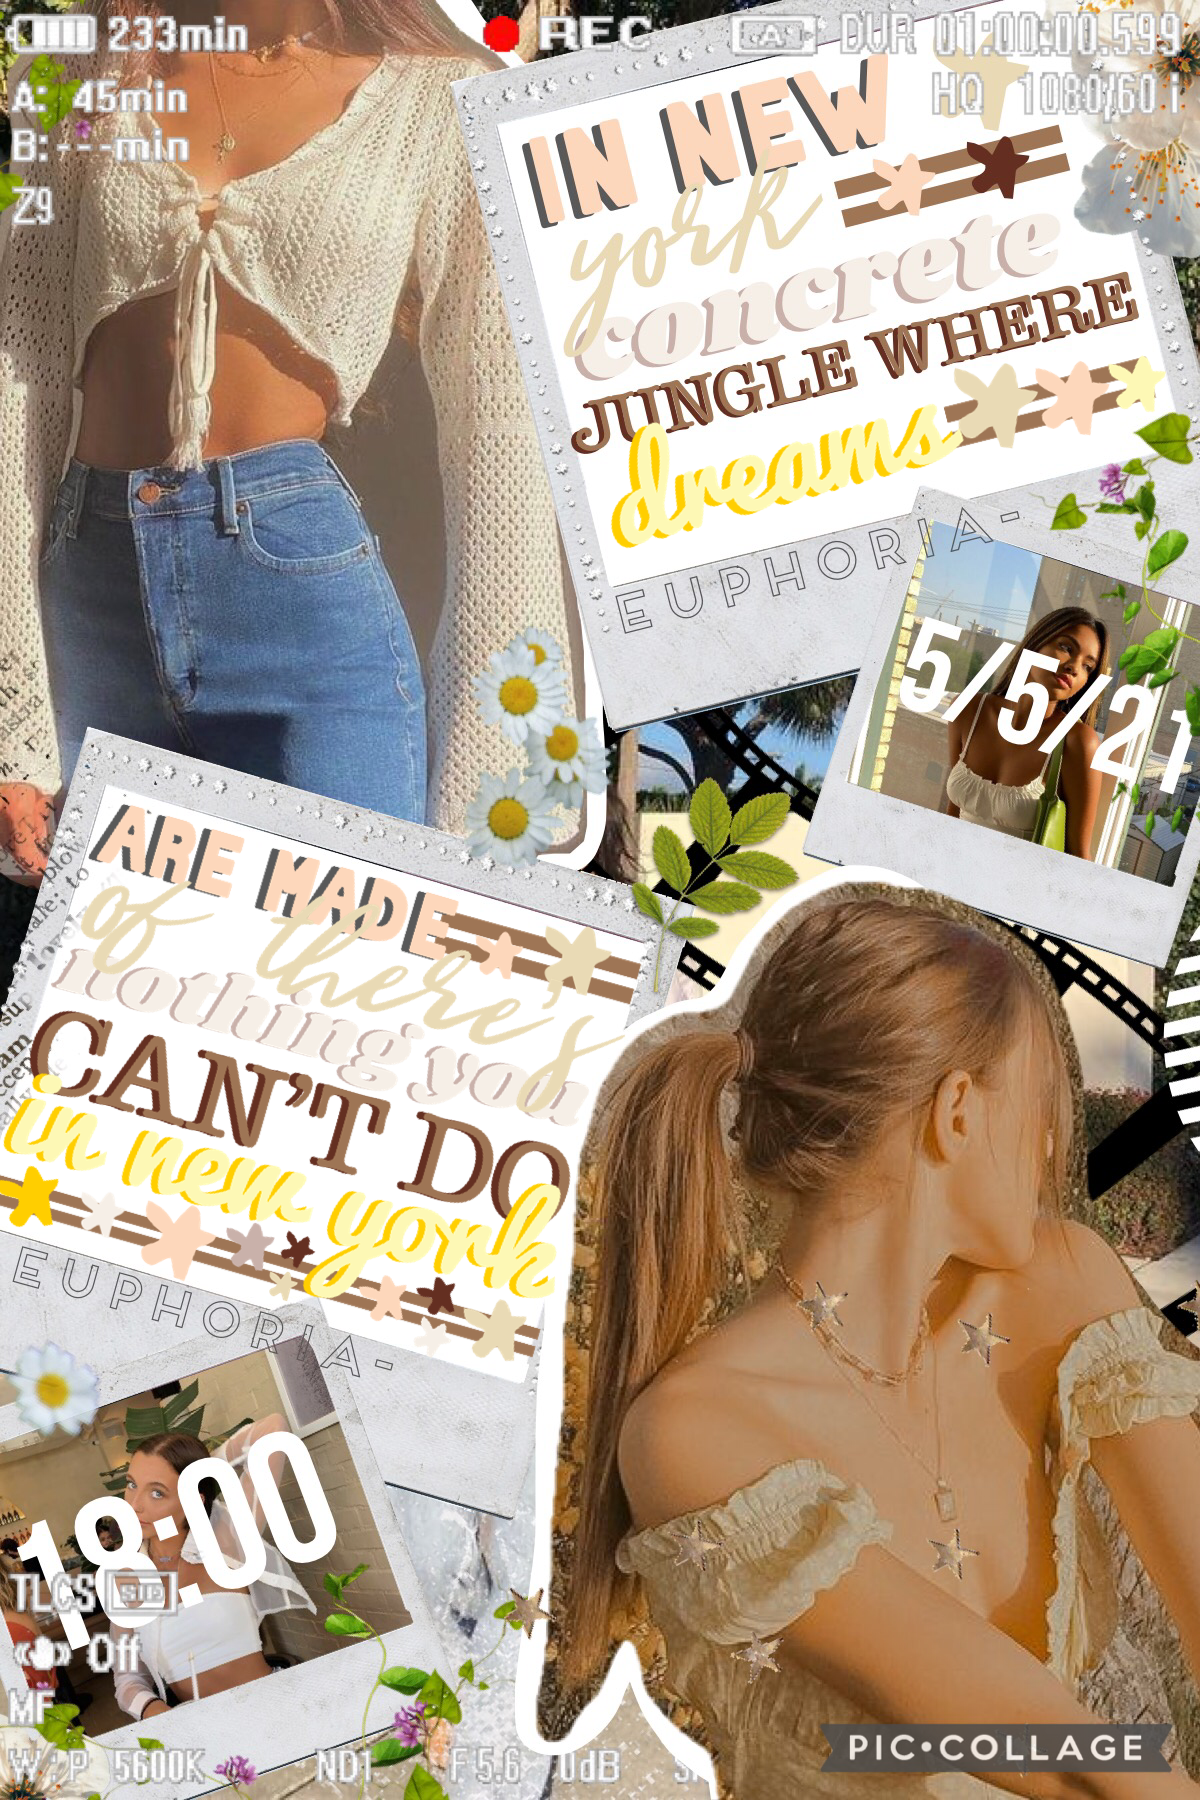 ✨6/5/21✨
Thank you so much for all the sweet messages, and thank you once again for 5k! This collage is inspired by stormyskies-, go follow them! I kinda wanted to go with a golden city theme! QOTD: Higlight of this week? AOTD: I’m not even gonna say beca